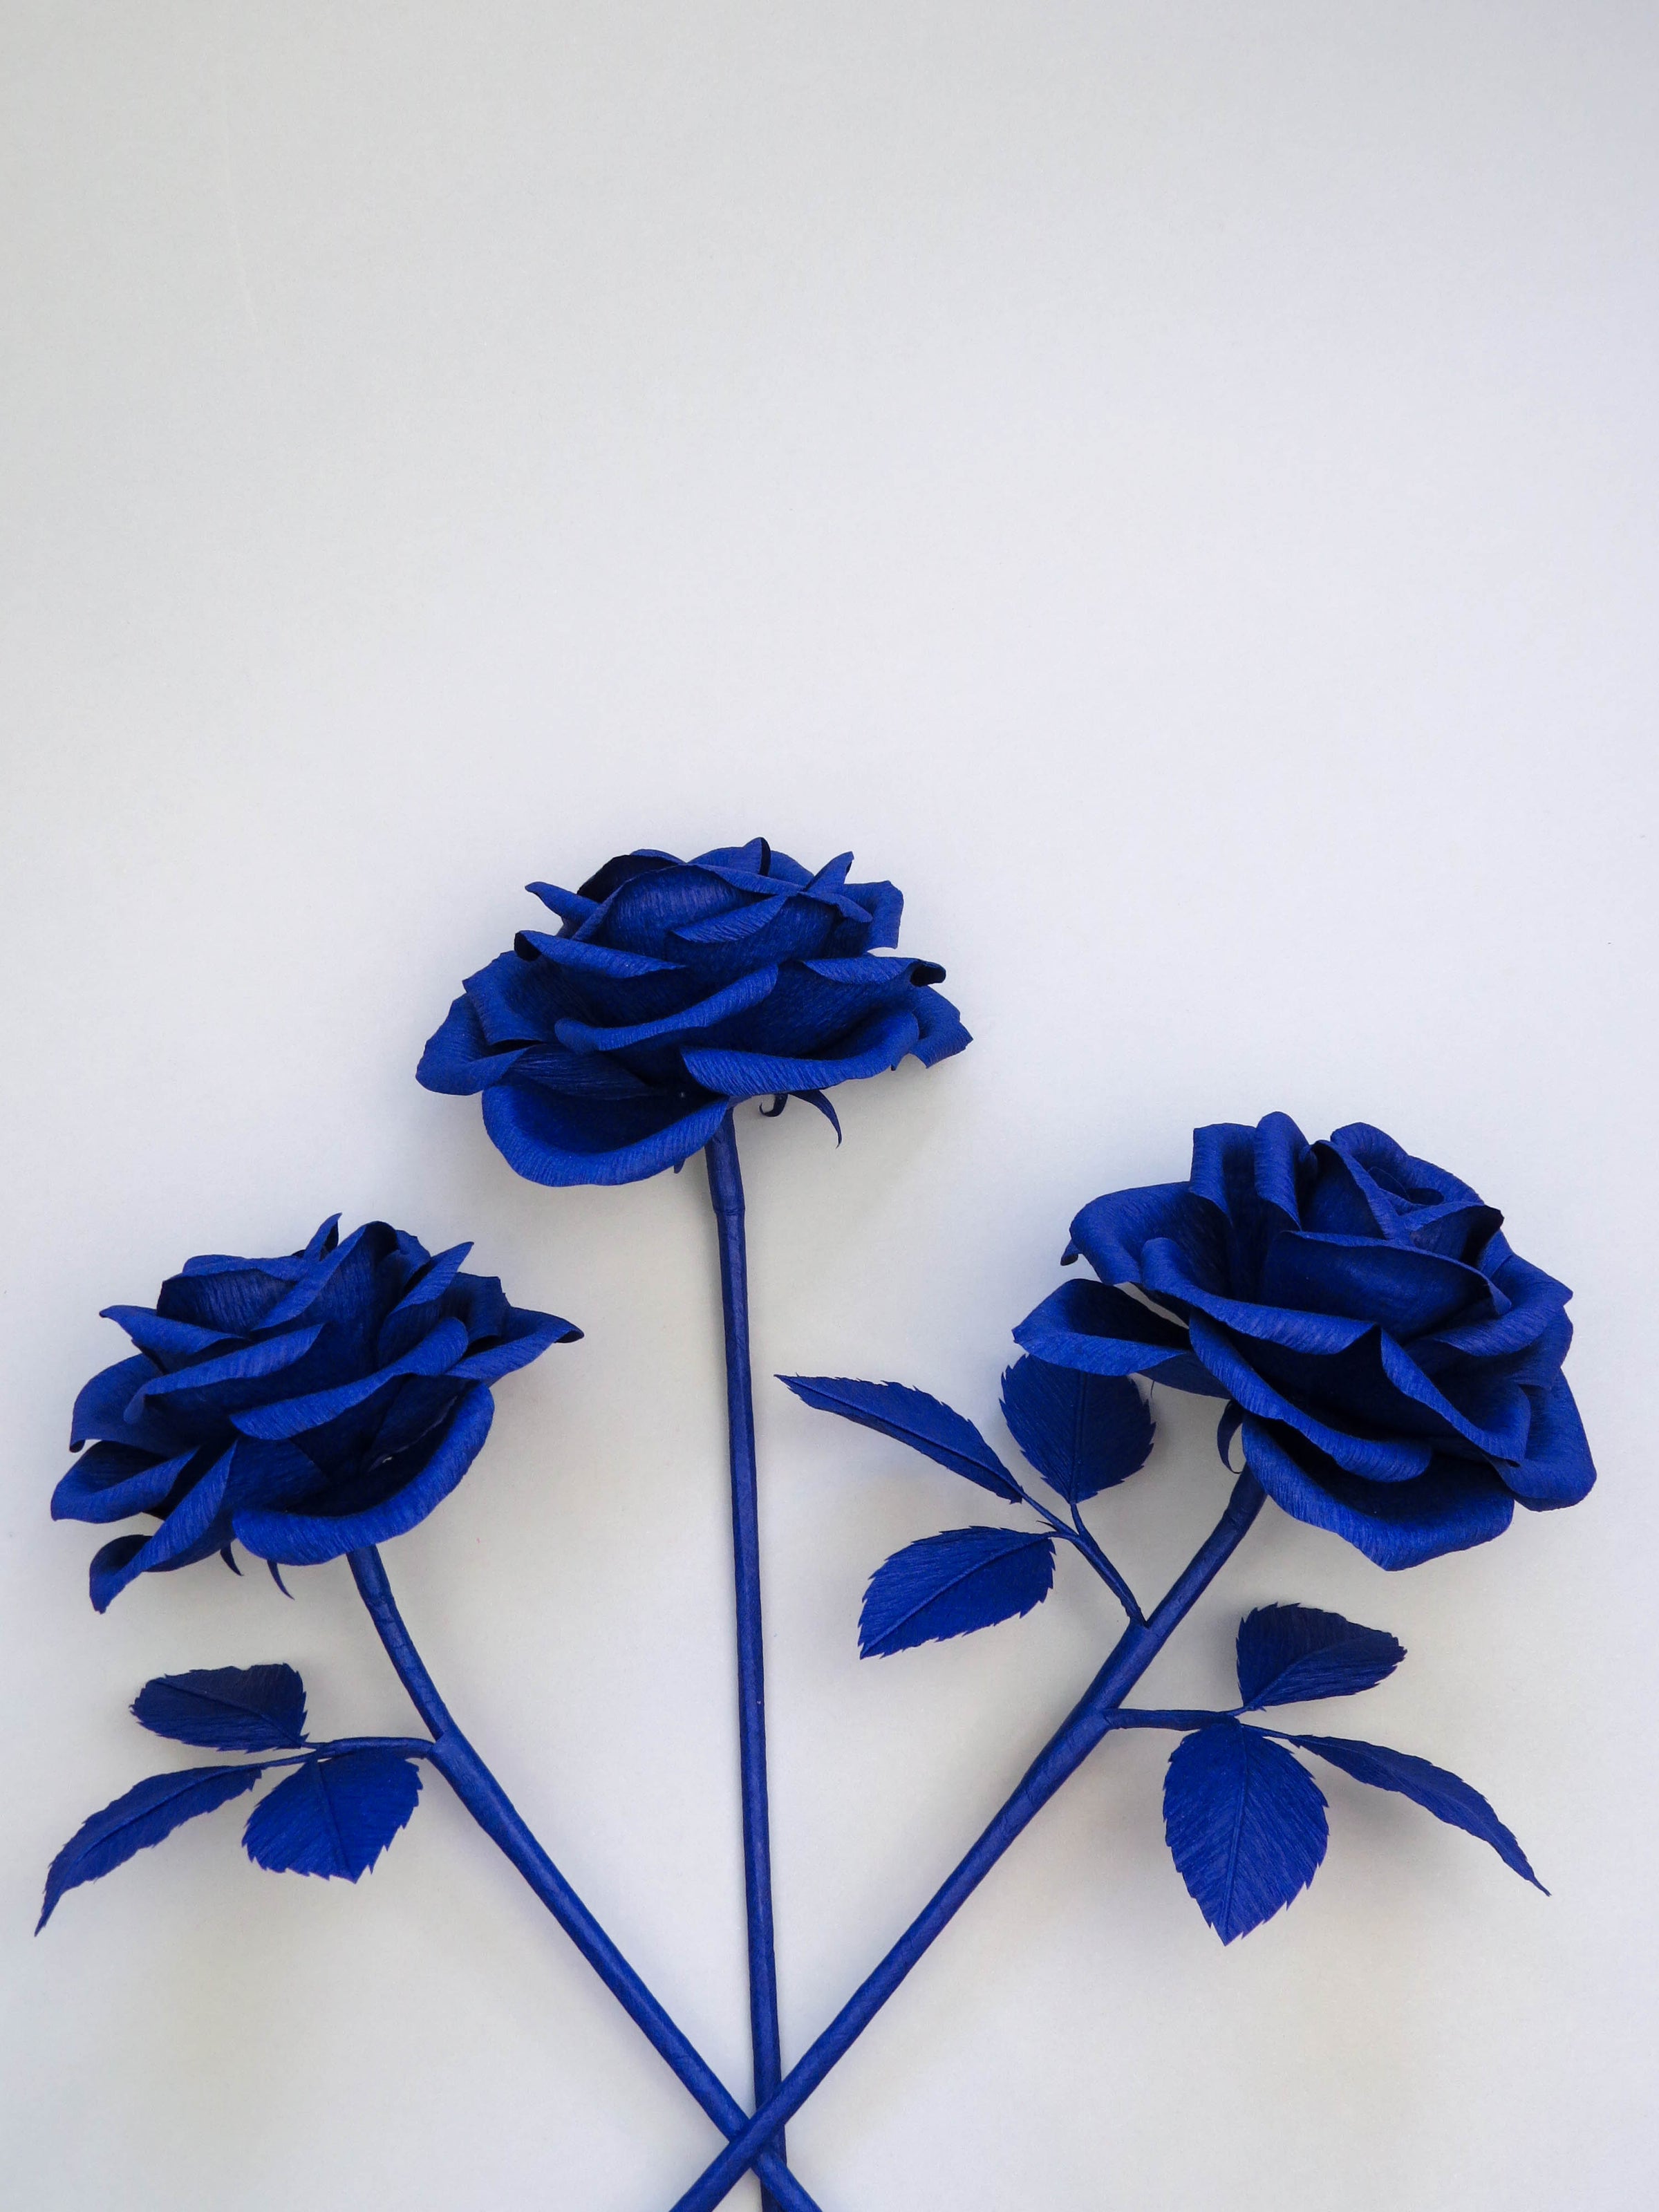 Three sapphire blue crepe paper roses randomly lying next to each other on a light grey background. The left rose is has three sapphire blue leaves, the middle rose has no leaves and the right rose has six sapphire blue leaves